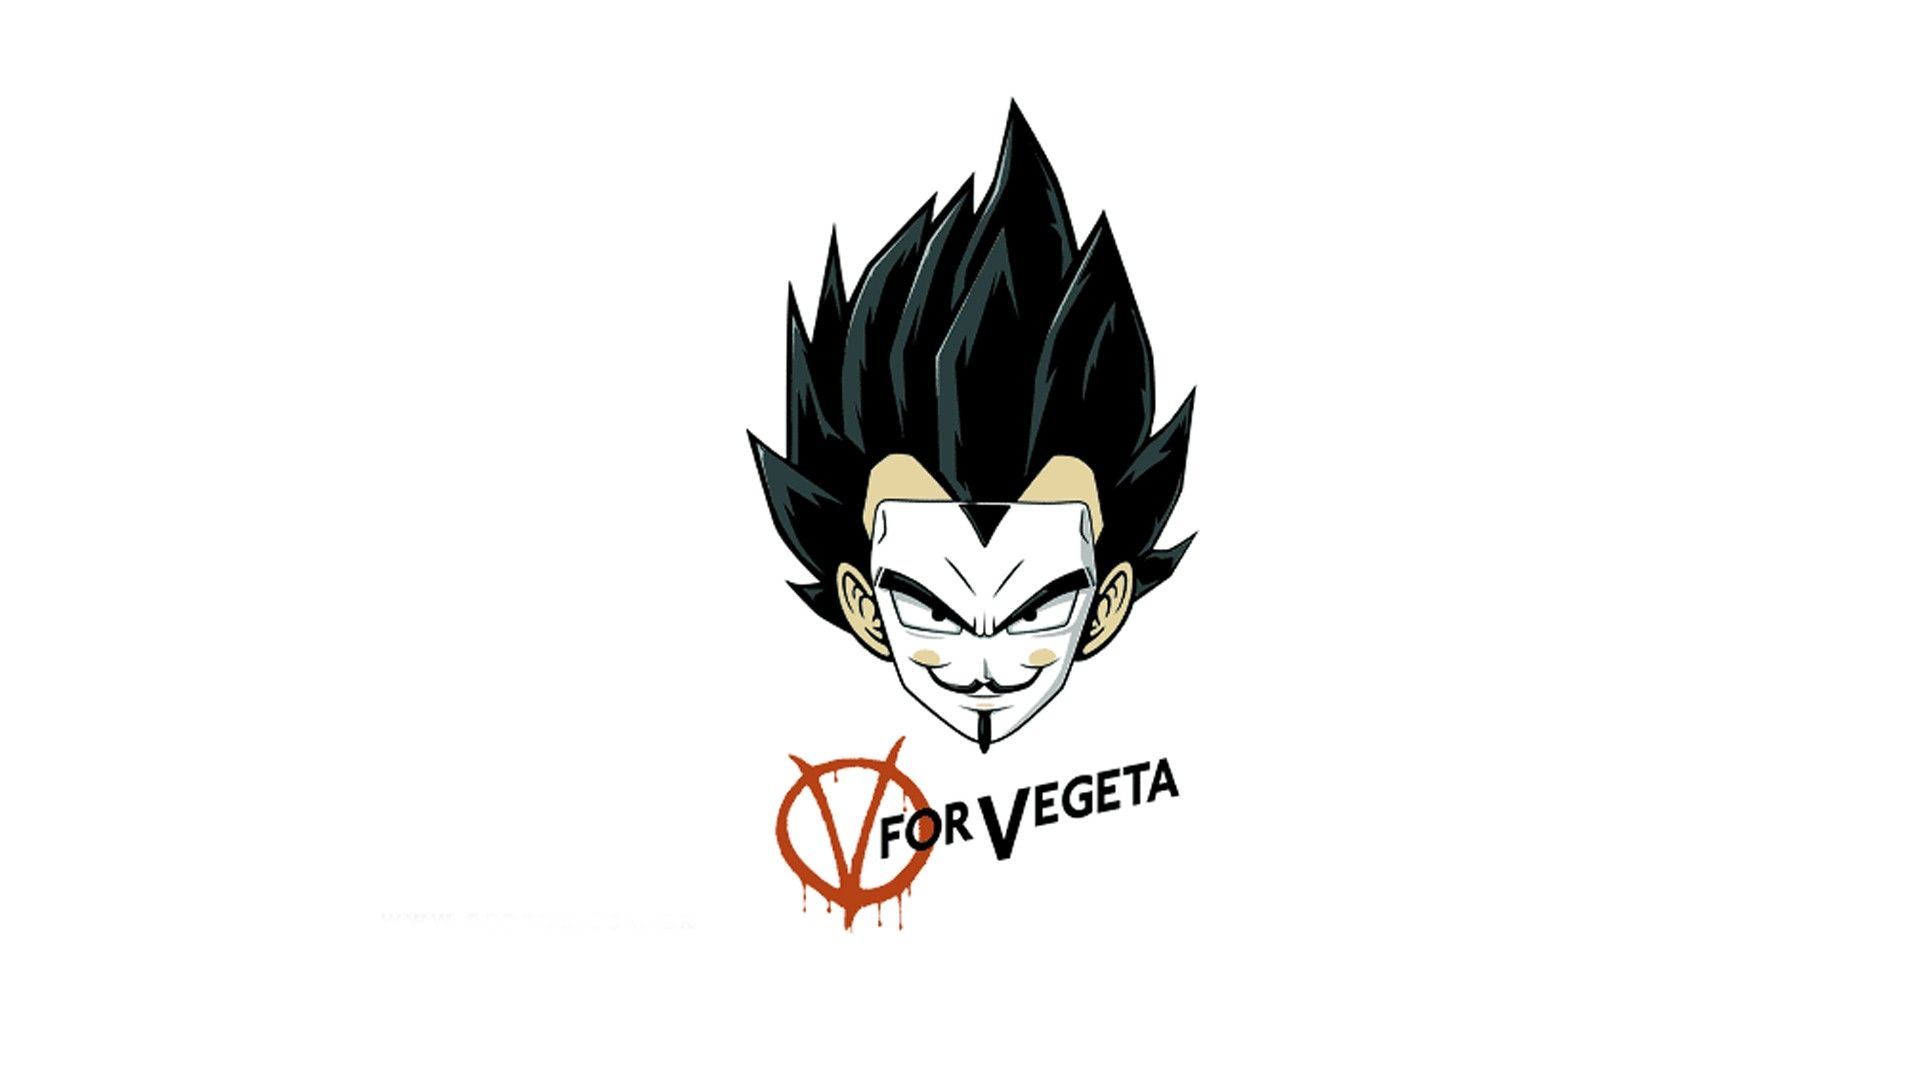 Background In High Quality Vegeta By Kgosi Ketch